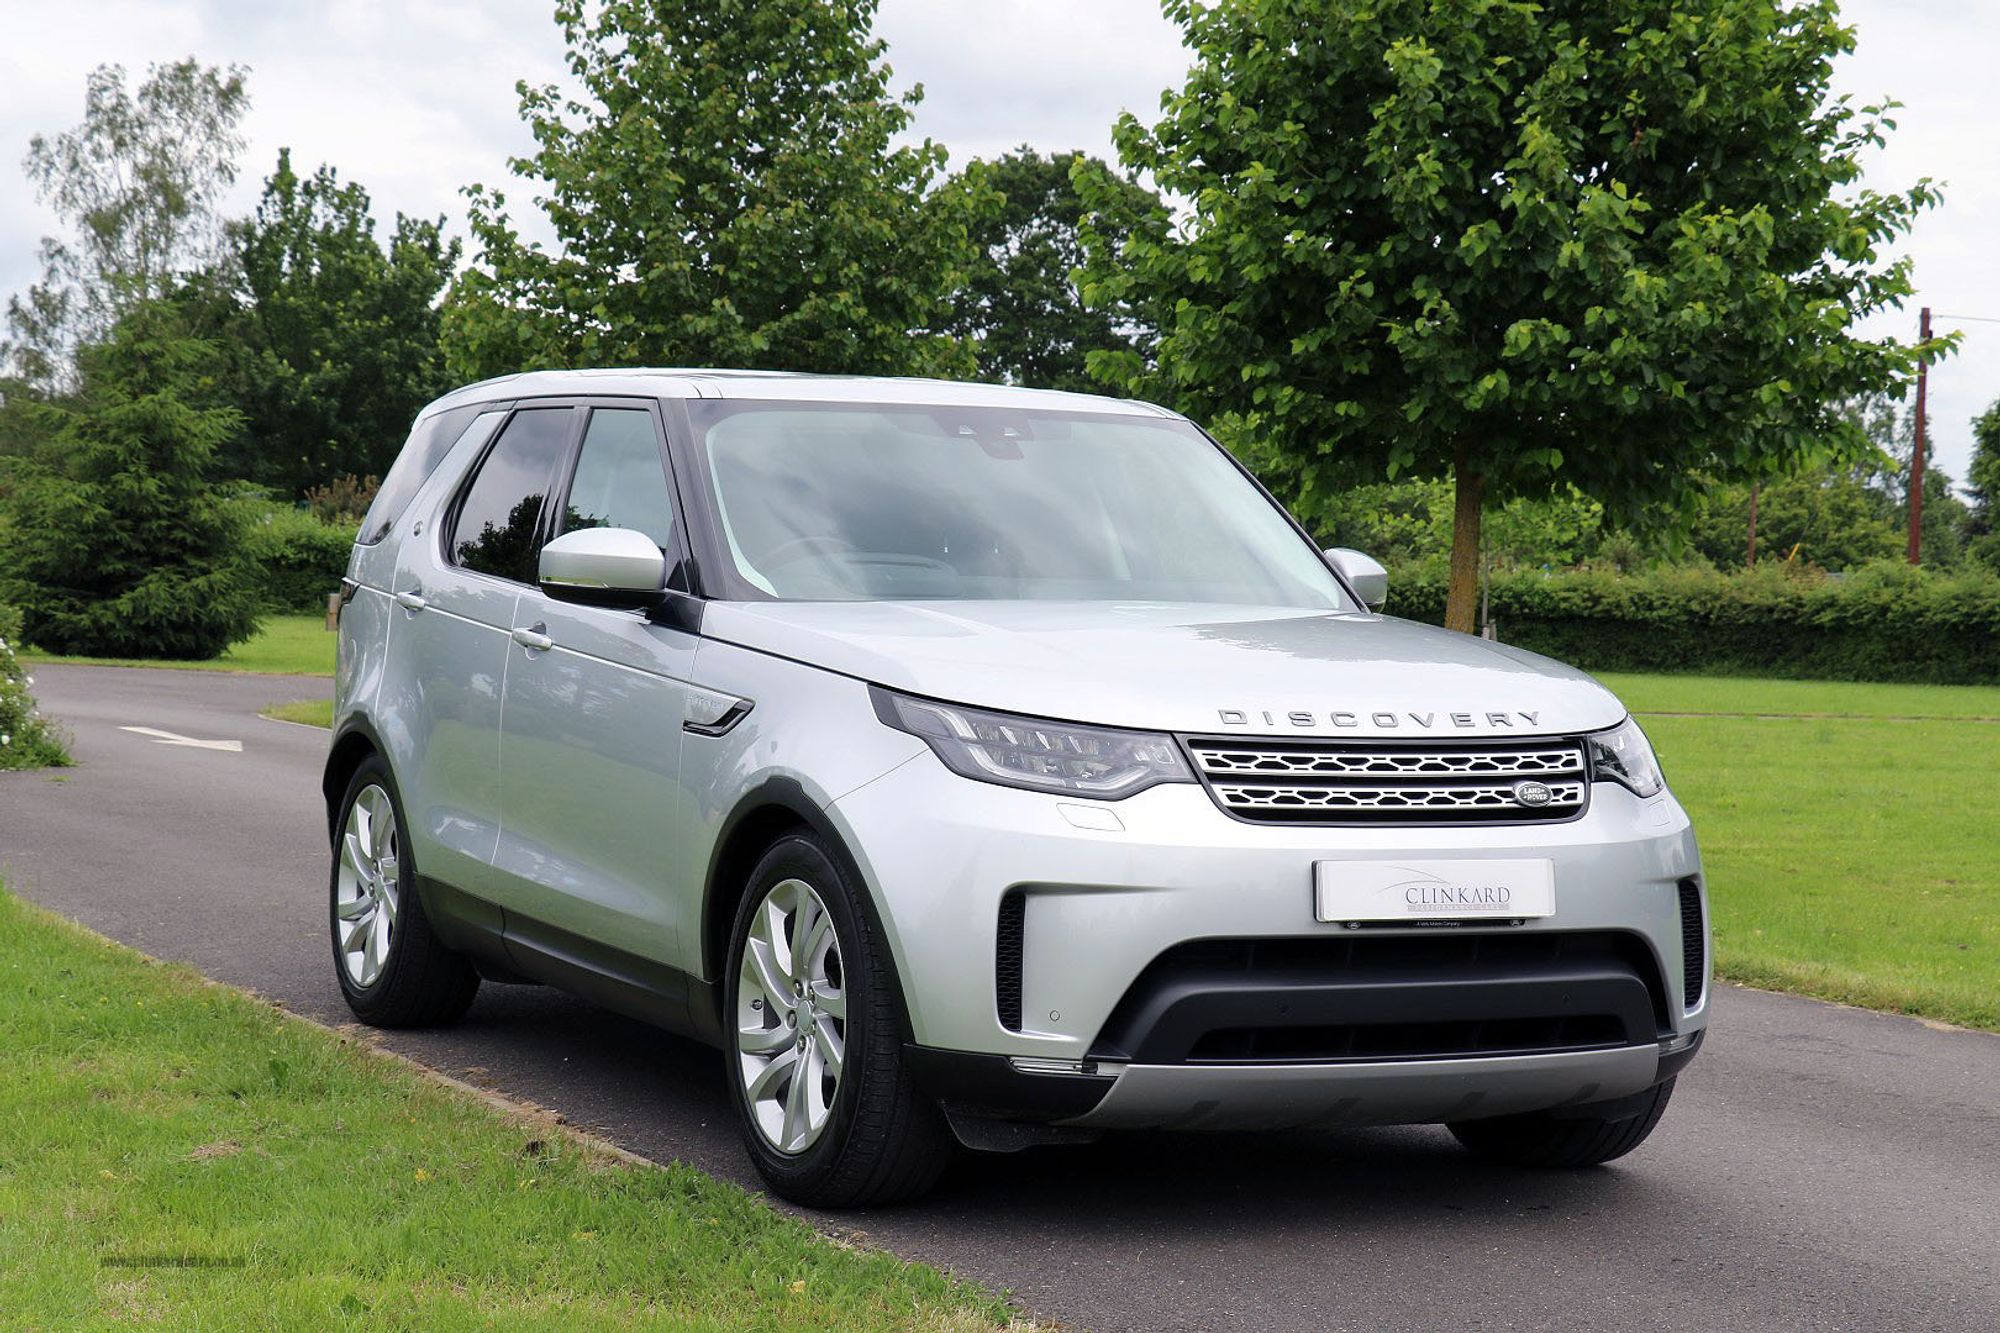 Landrover Discovery 3.0 TD6 HSE Commercial